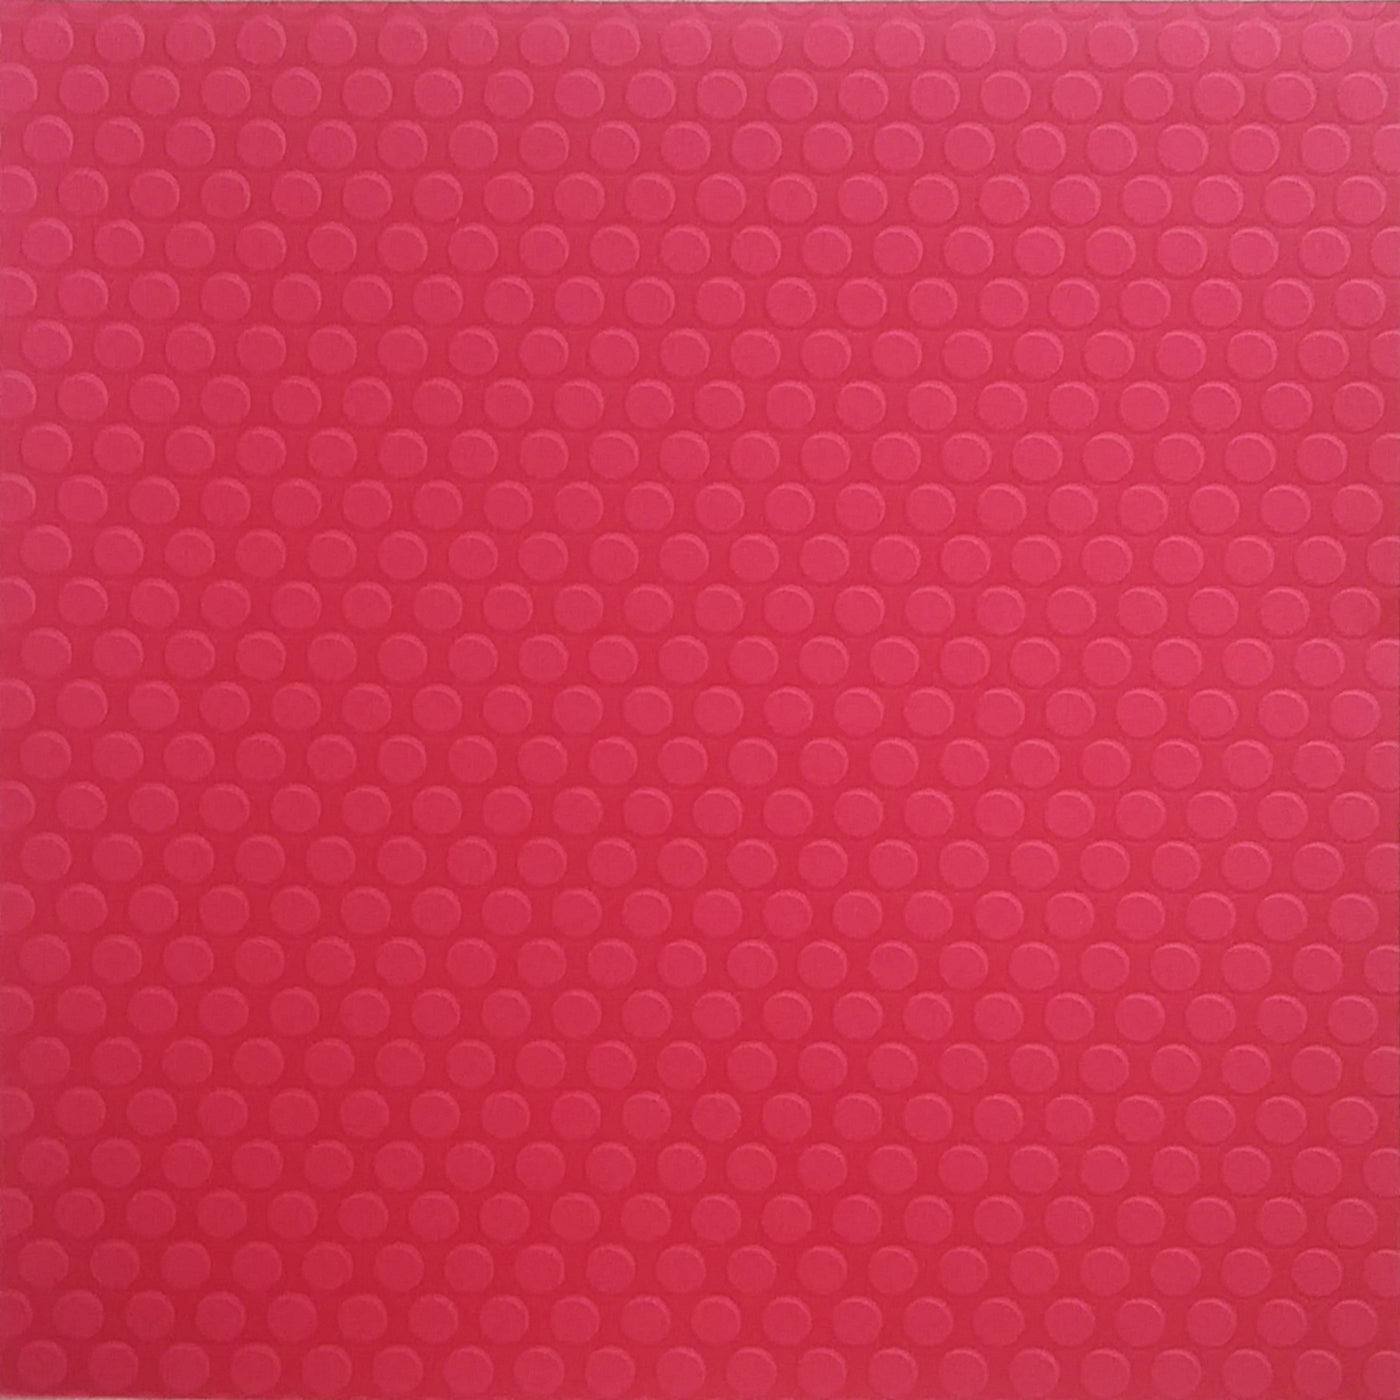 12x12 cardstock with red-on-red embossed dots - Recollection Signature